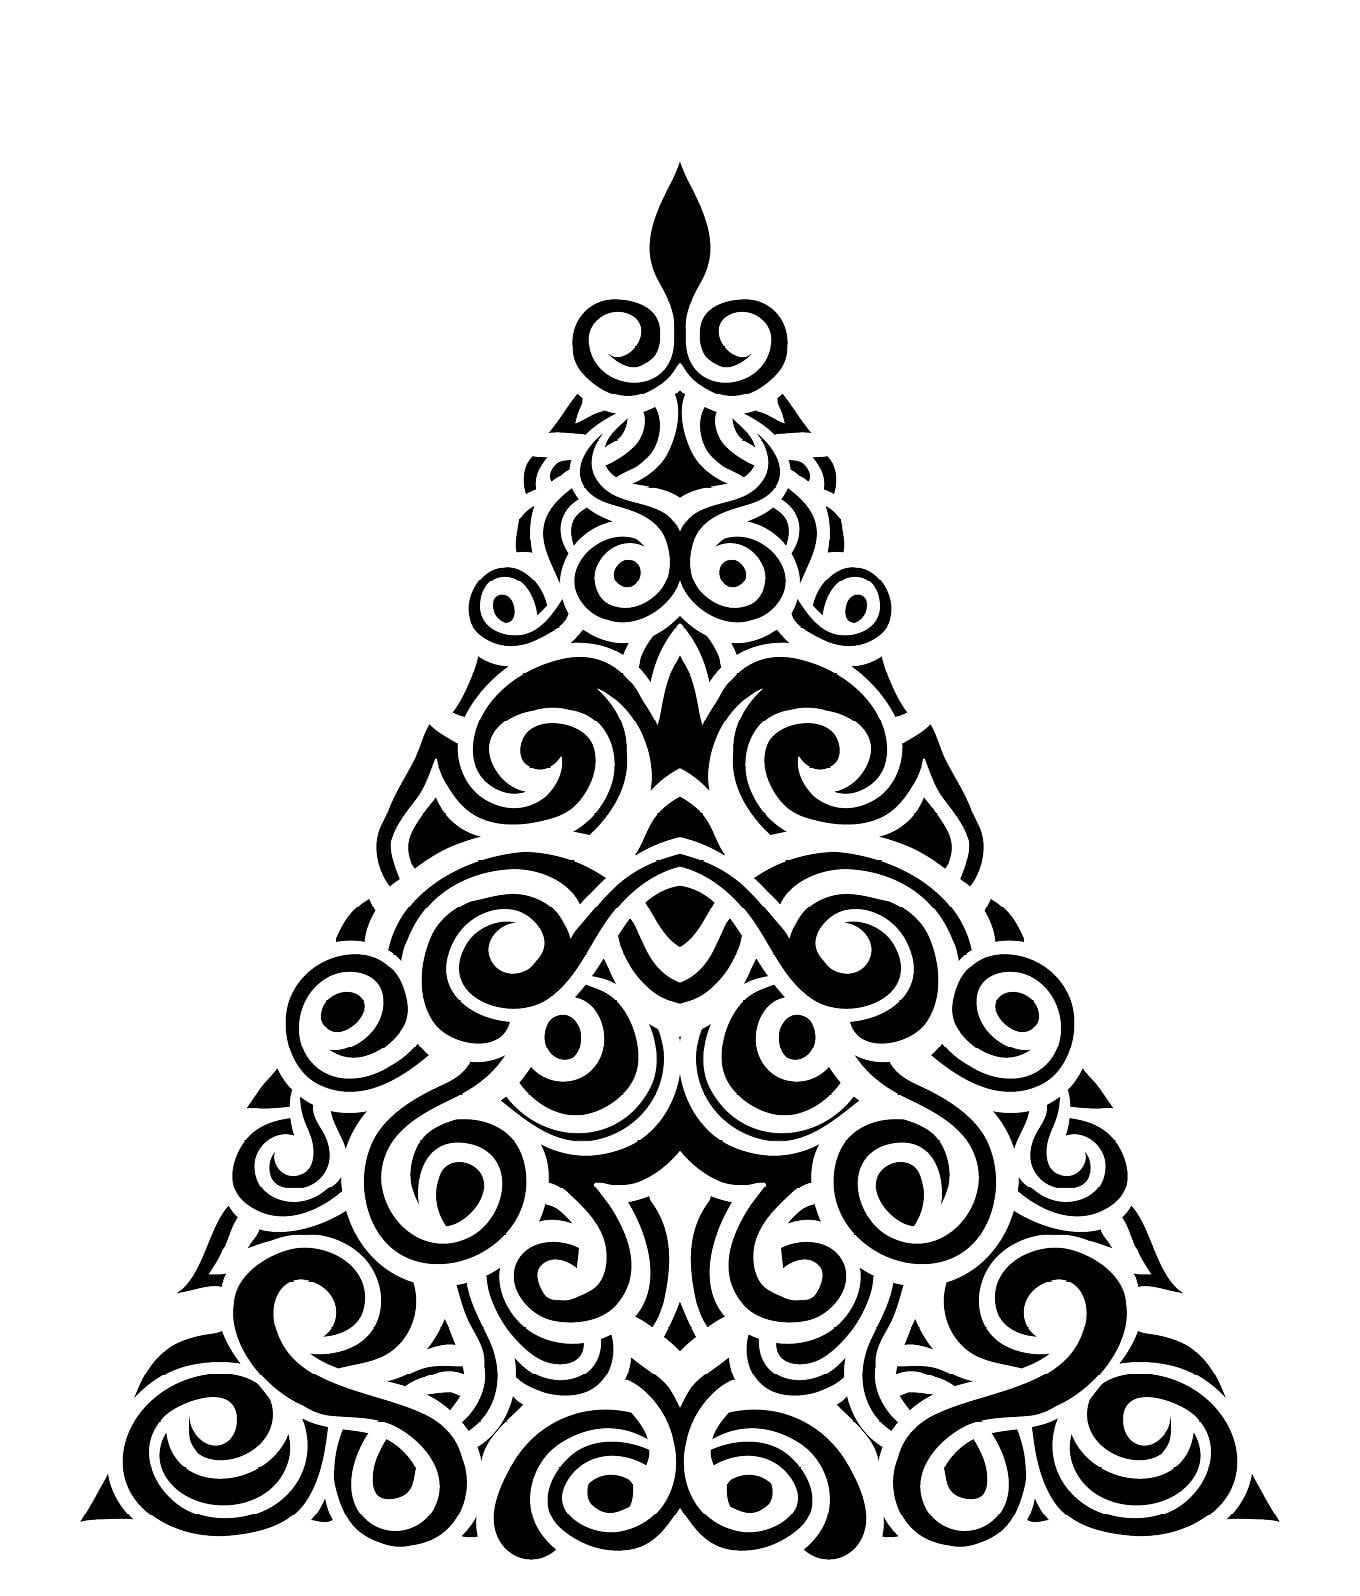 Pretty Swirls On An Abstract Xmas Tree Design Coloring Page